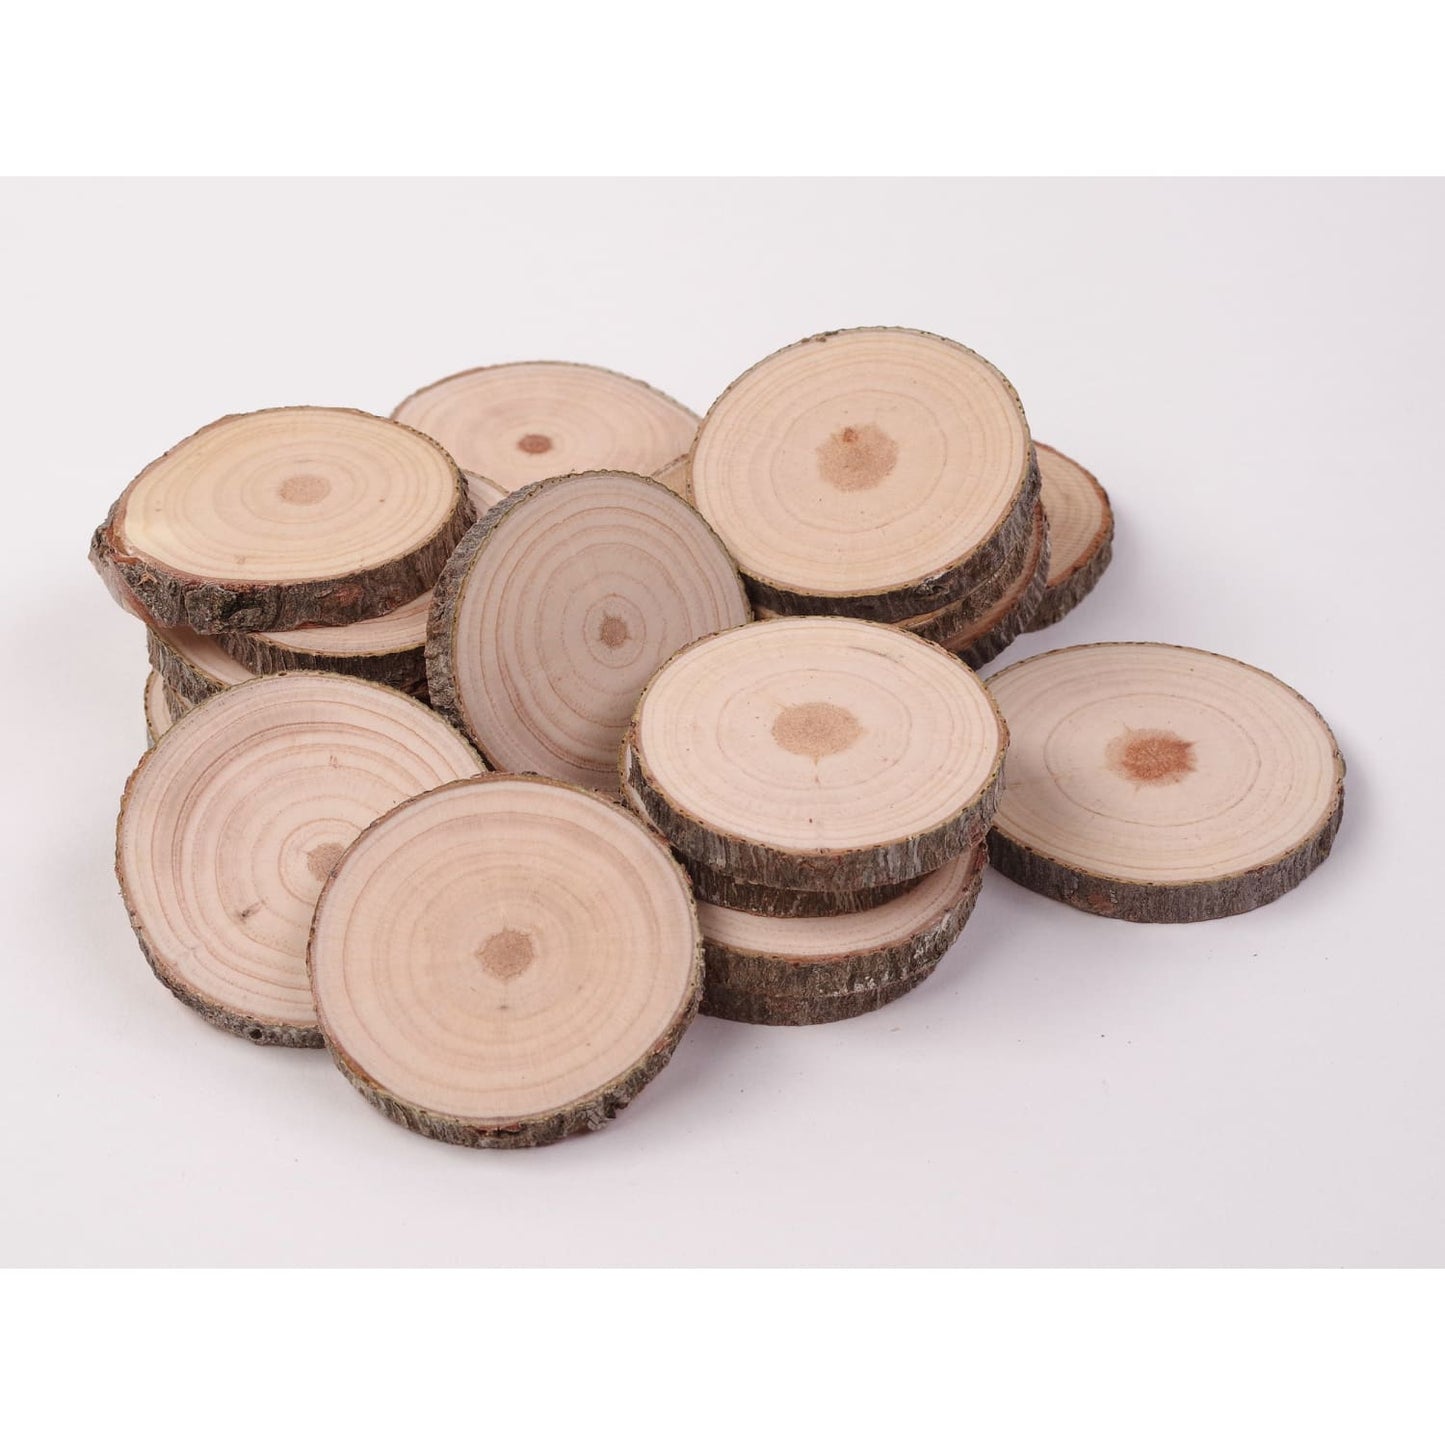 4 - 6 Cm Wood Slices (20 Pack) - Small Wood Slices